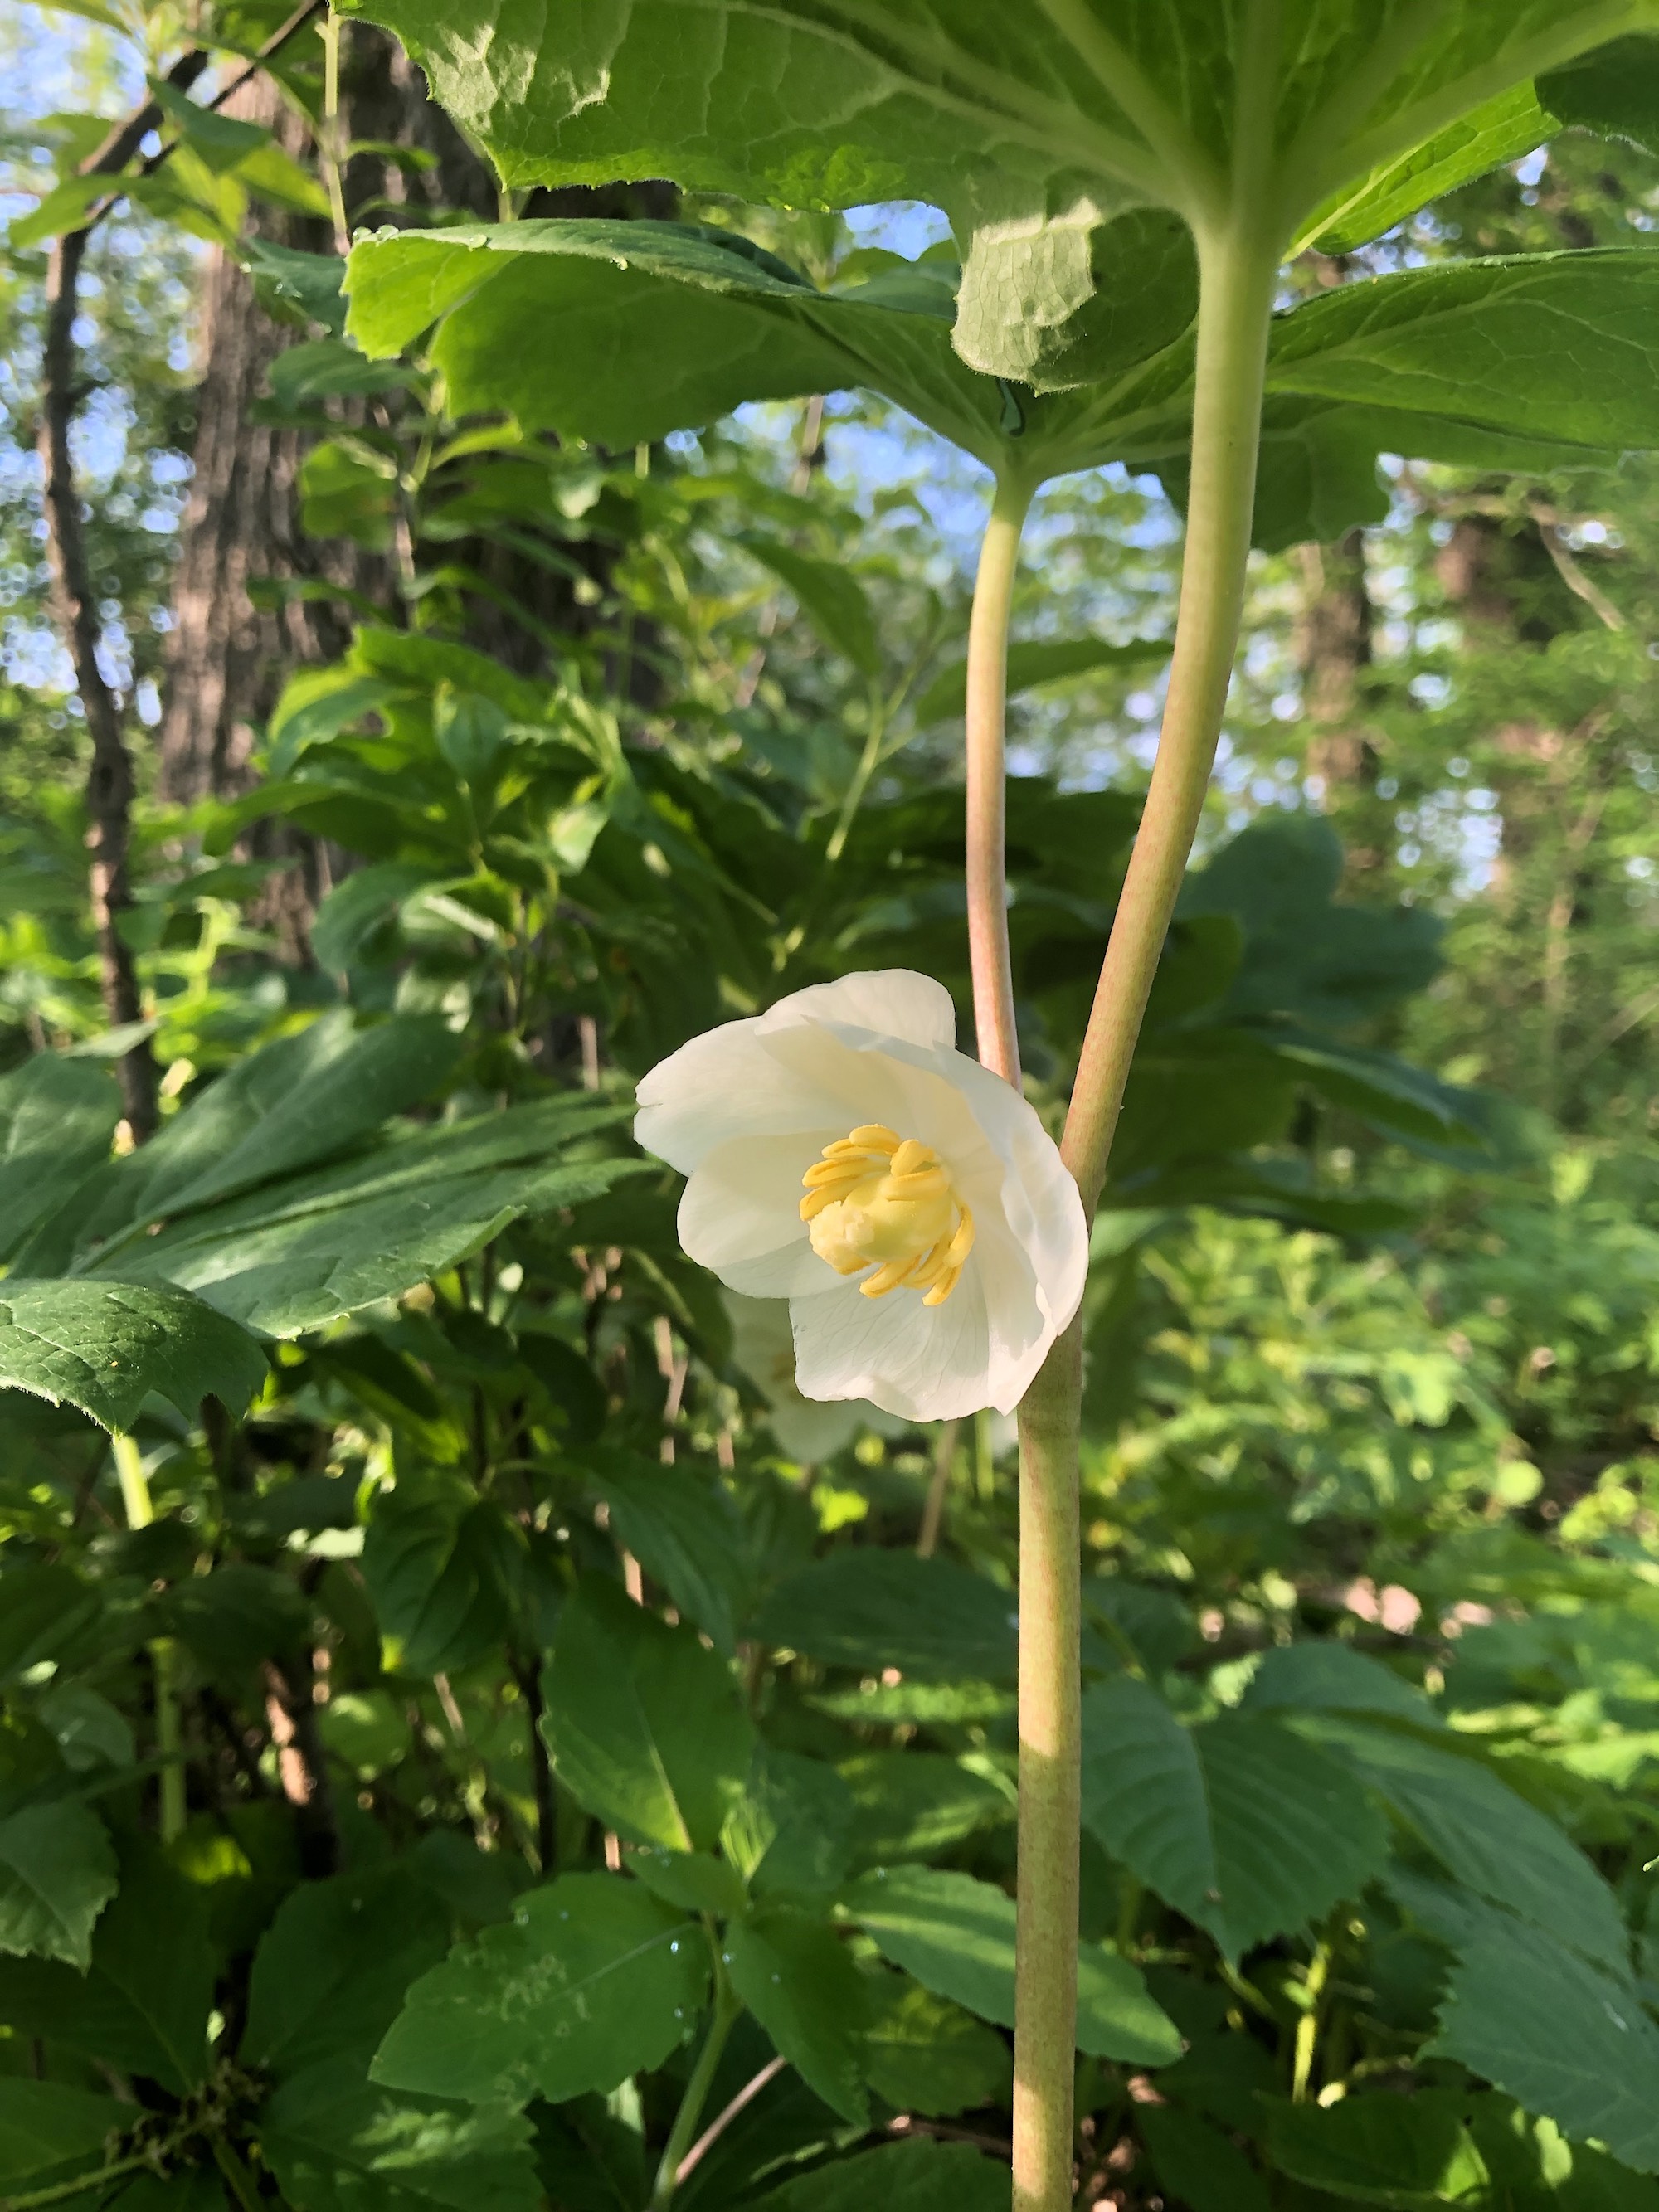 Mayapple blooms in wood between Duck Pond and Marion Dunn in Madison, Wisconsin on May 26, 2020.